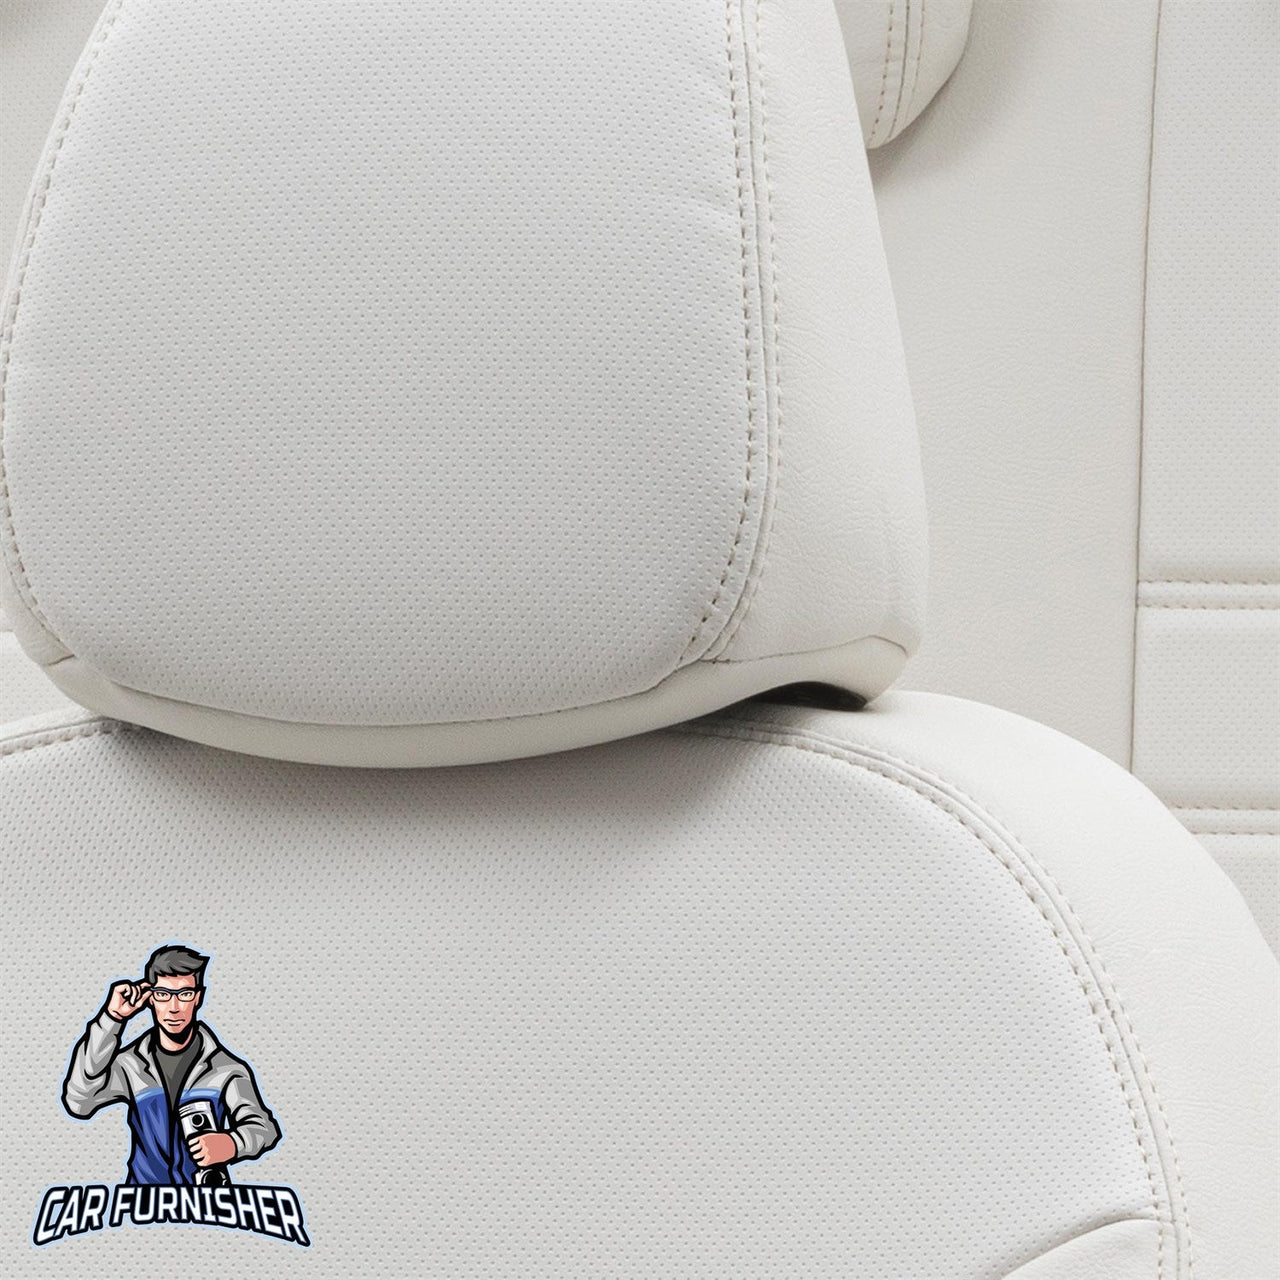 Jeep Wrangler Seat Covers Istanbul Leather Design Ivory Leather